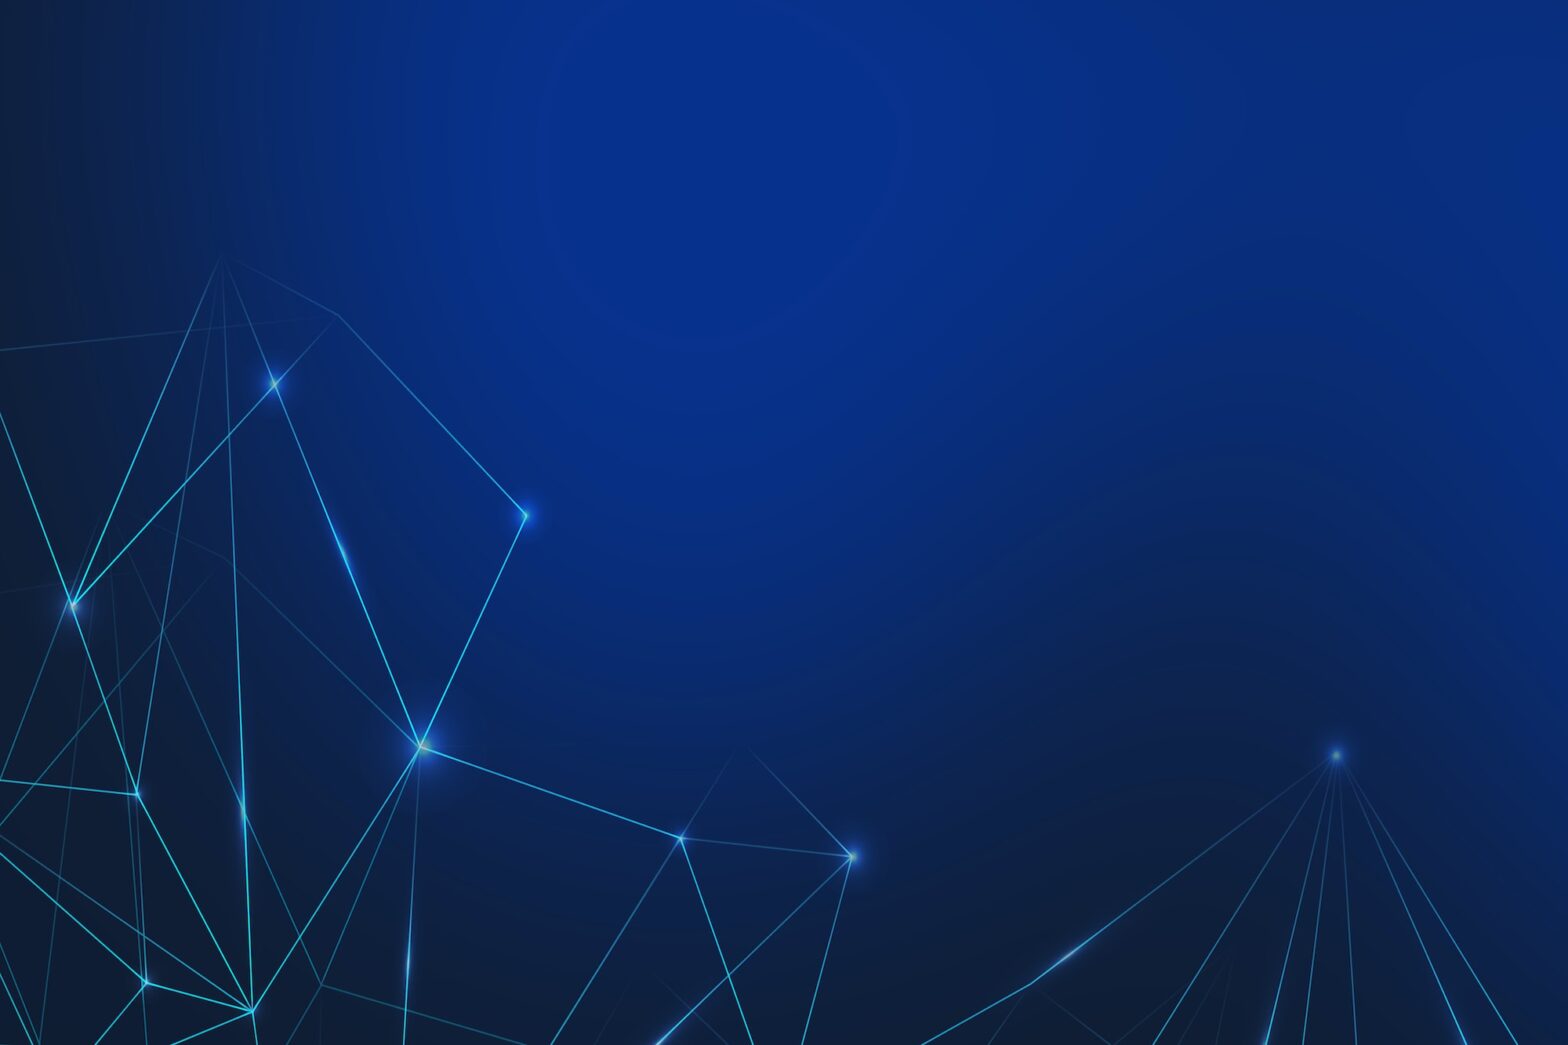 Connecting lines on a blue background illustration